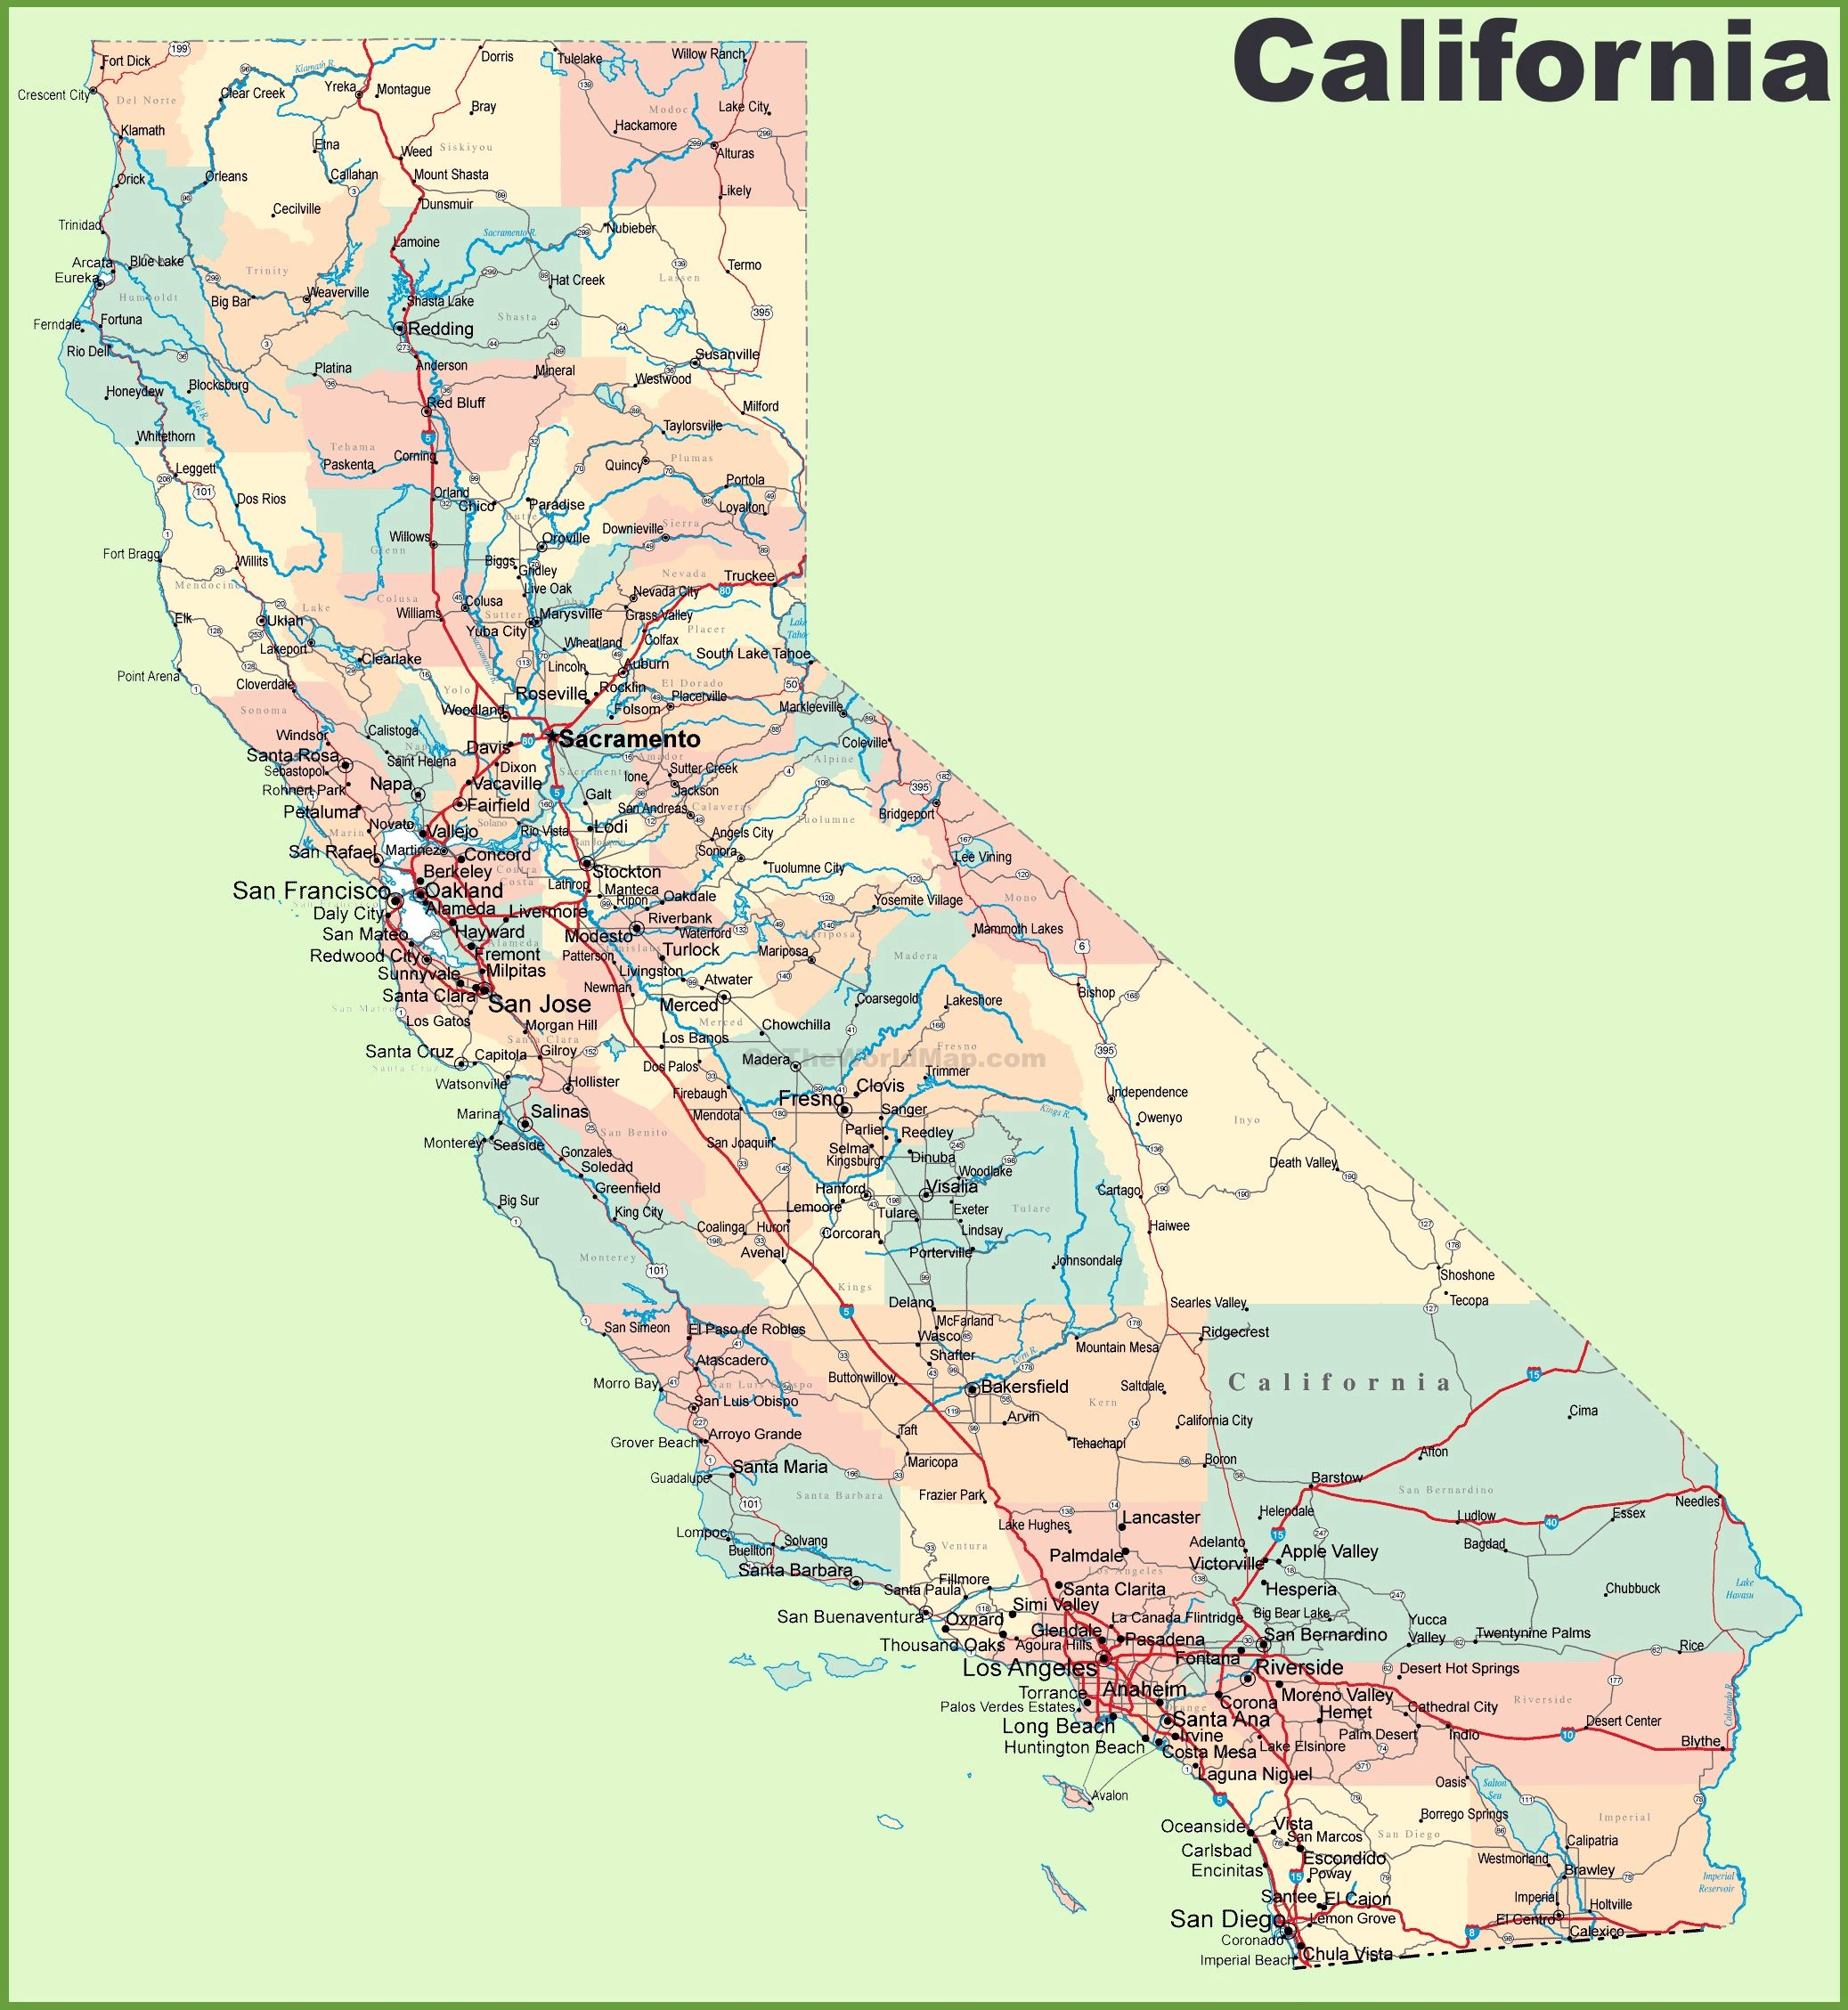 Large California Maps For Free Download And Print | High-Resolution - Printable Road Map Of Southern California